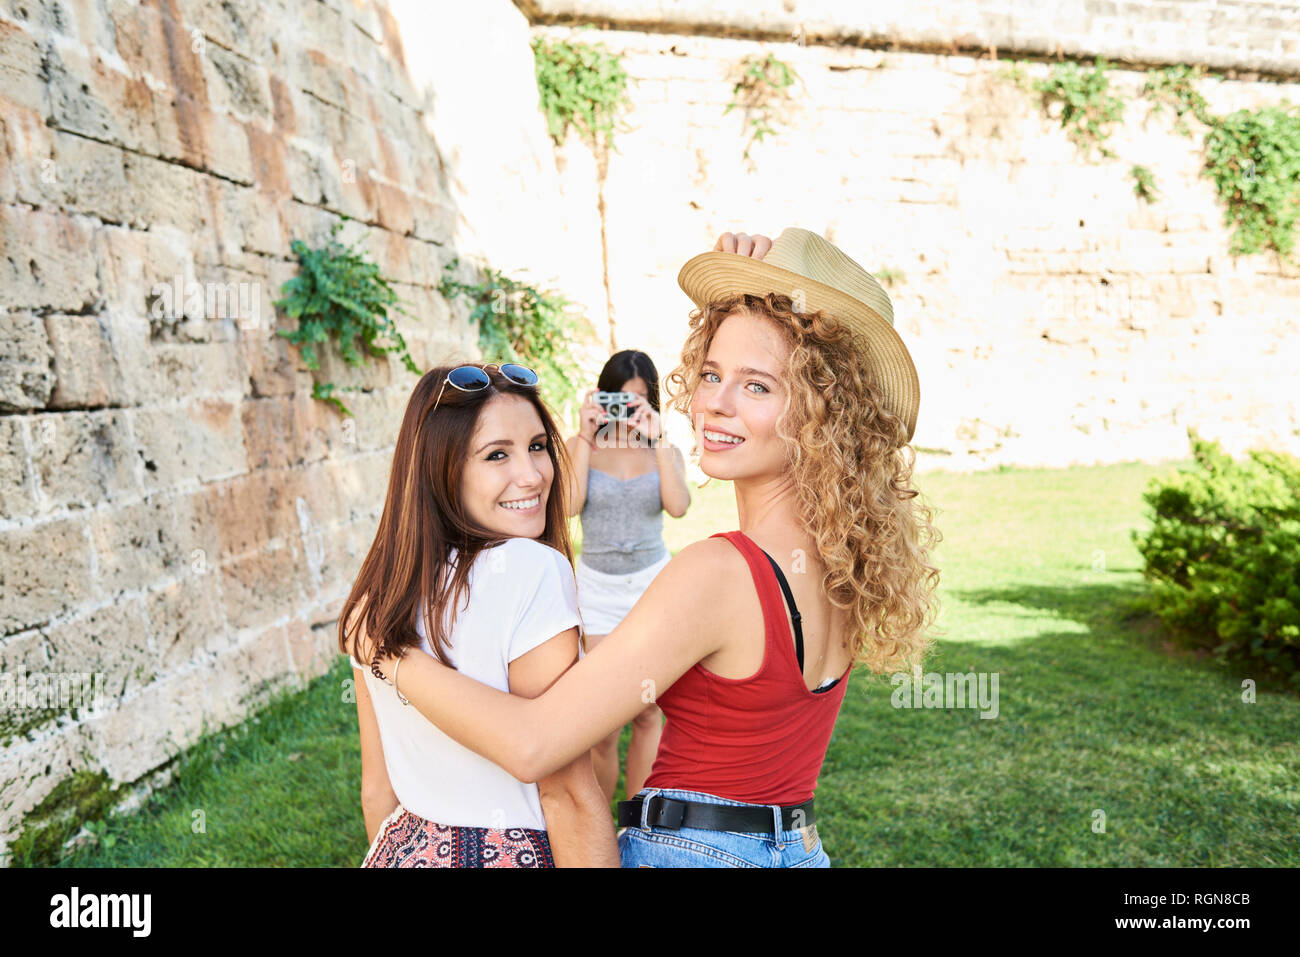 Spain, Mallorca, Palma, two female friends smiling at camera while another friend is taking a picture of them Stock Photo